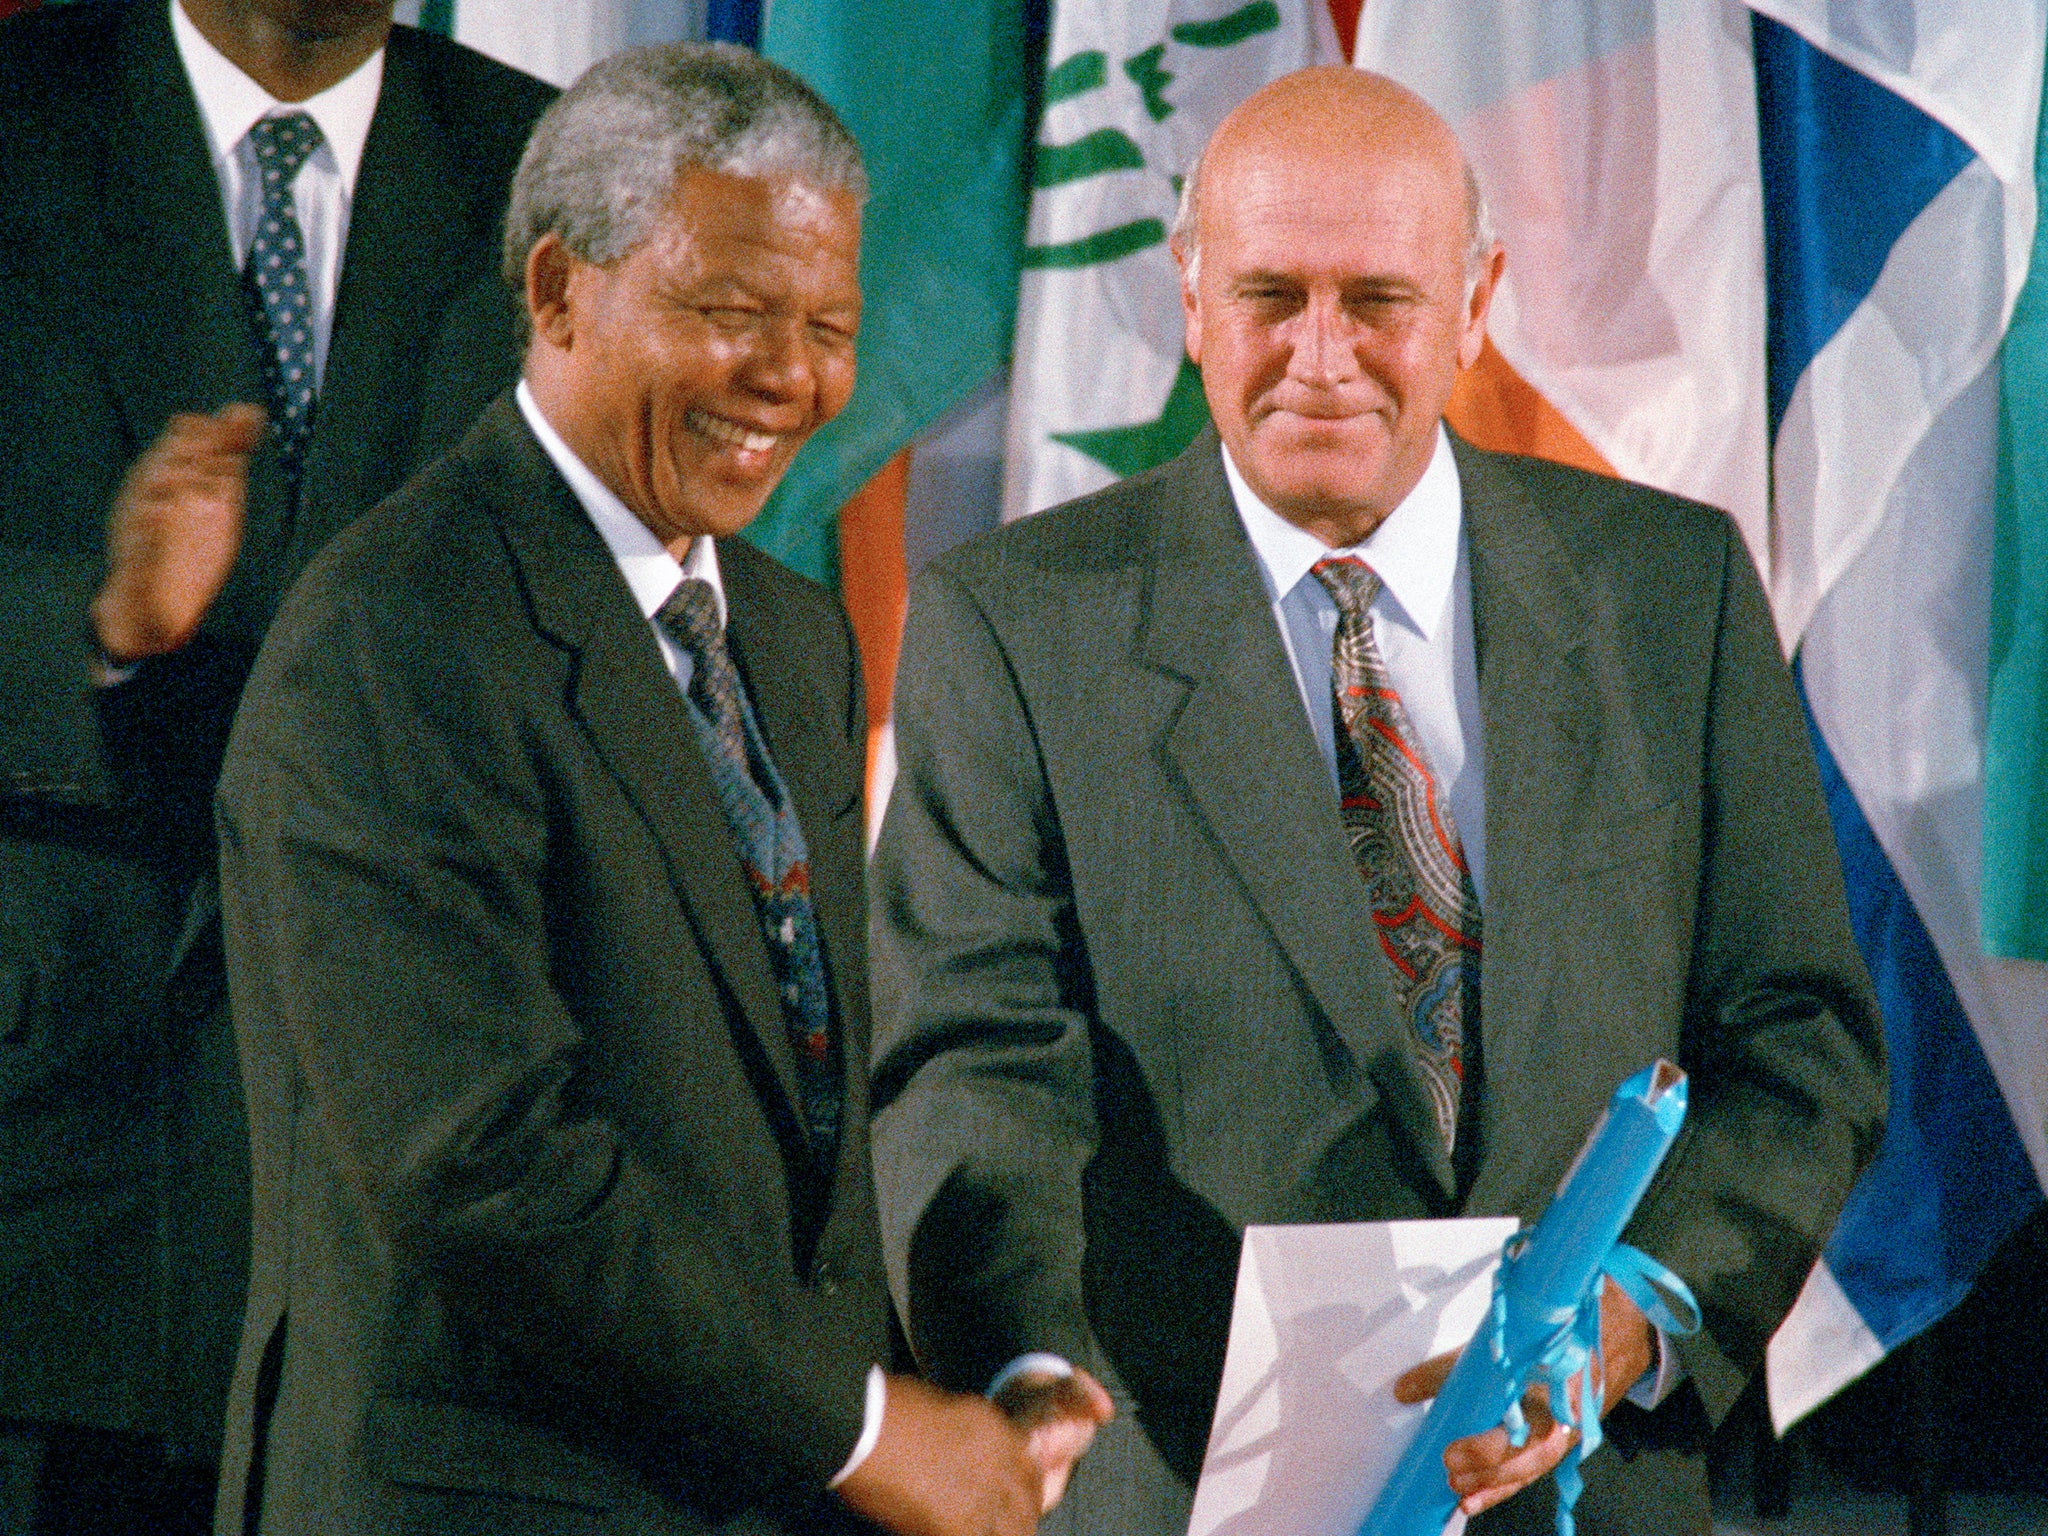 FW De Klerk, right, shakes hands with Nelson Mandela, after they received the Peace Prize in Paris in 1992